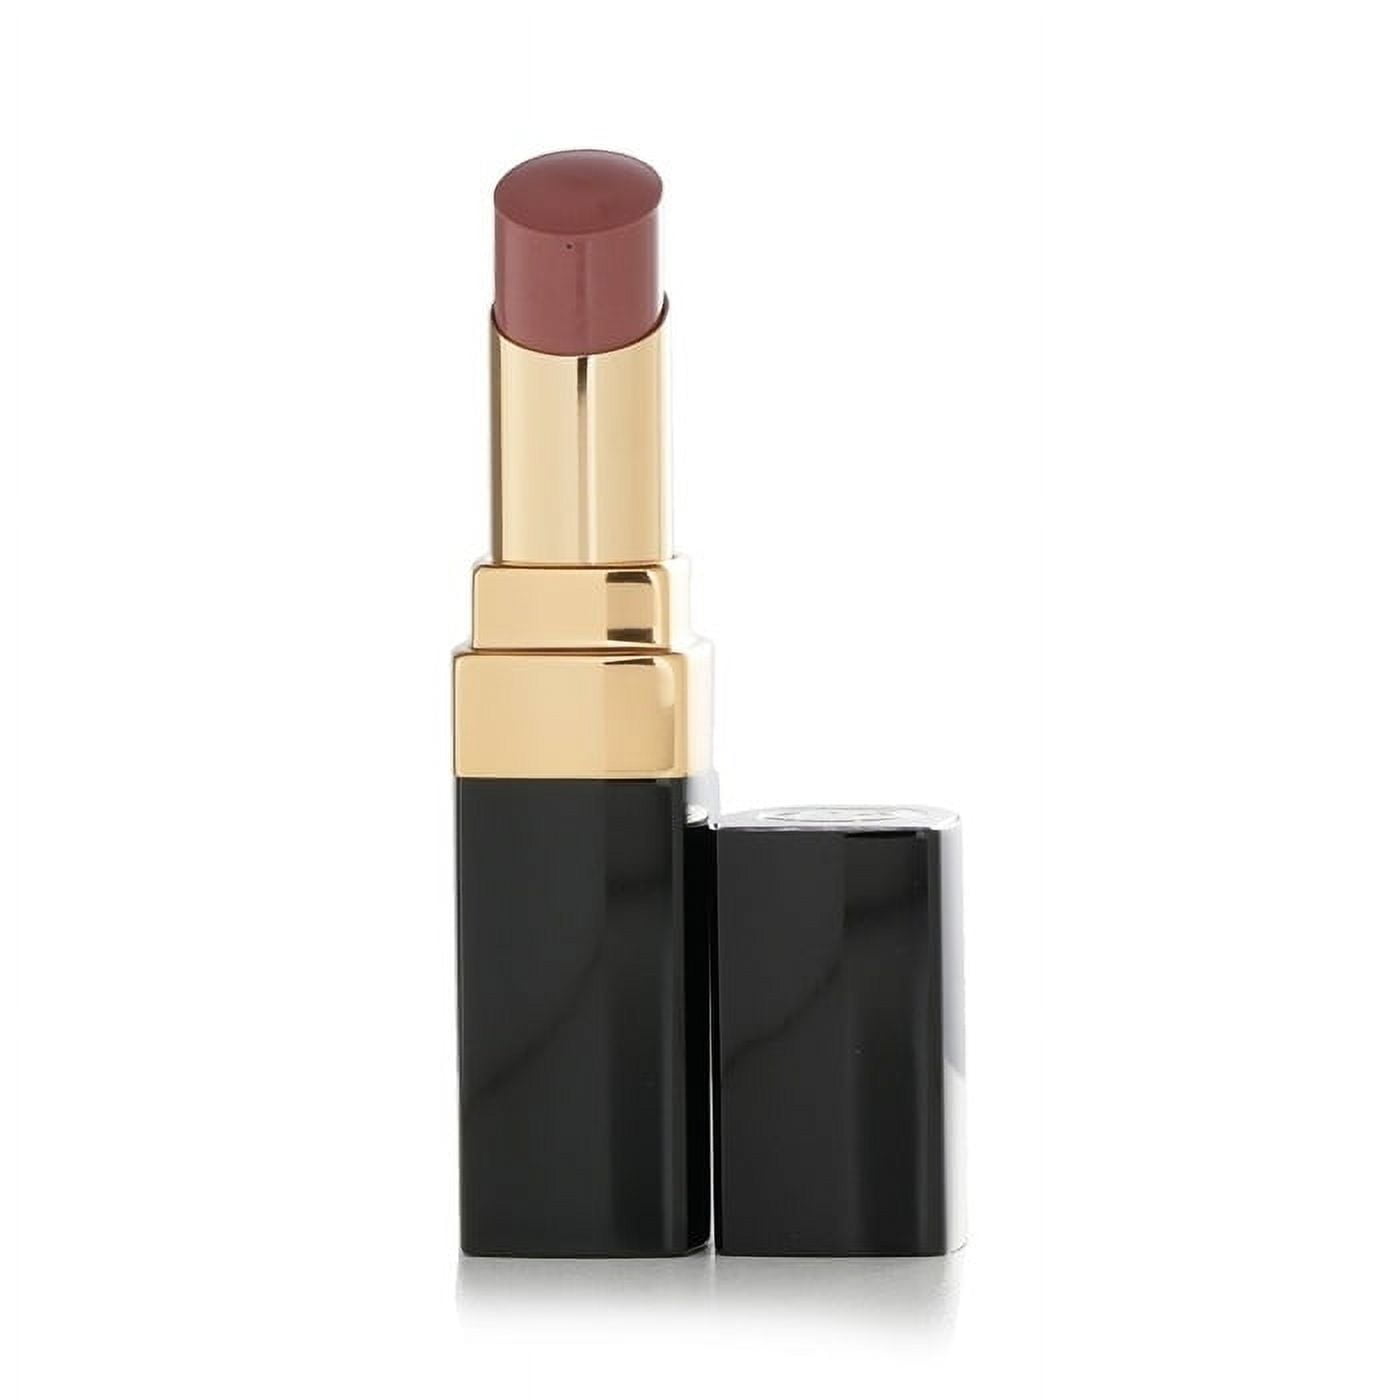 Chanel Rouge Coco Flash Hydrating Vibrant Shine Lip Colour - # 116 Easy 3g